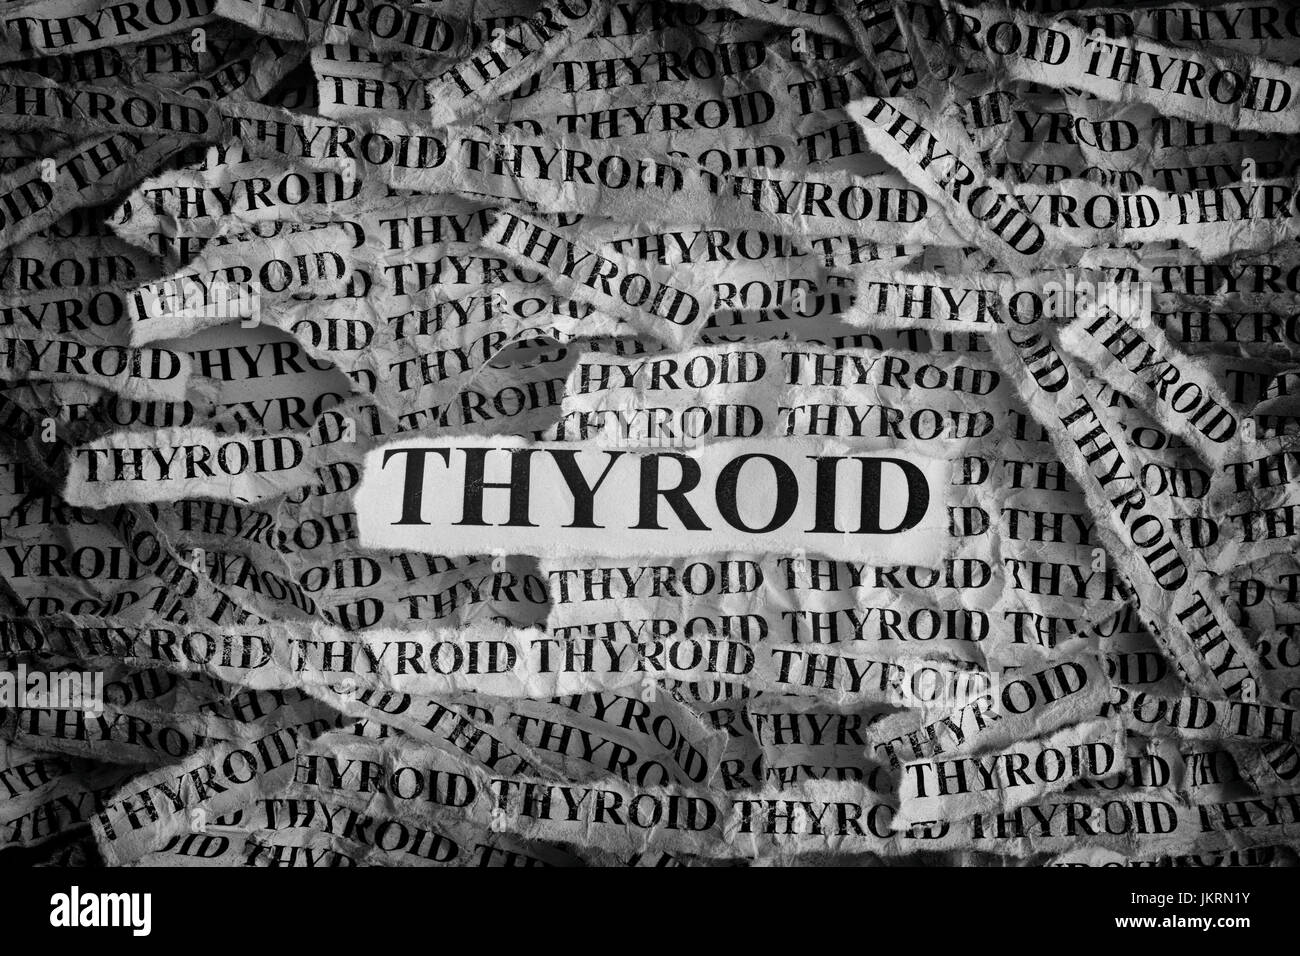 Thyroid. Torn pieces of paper with the words Thyroid. Concept Image. Black and White. Closeup. Stock Photo